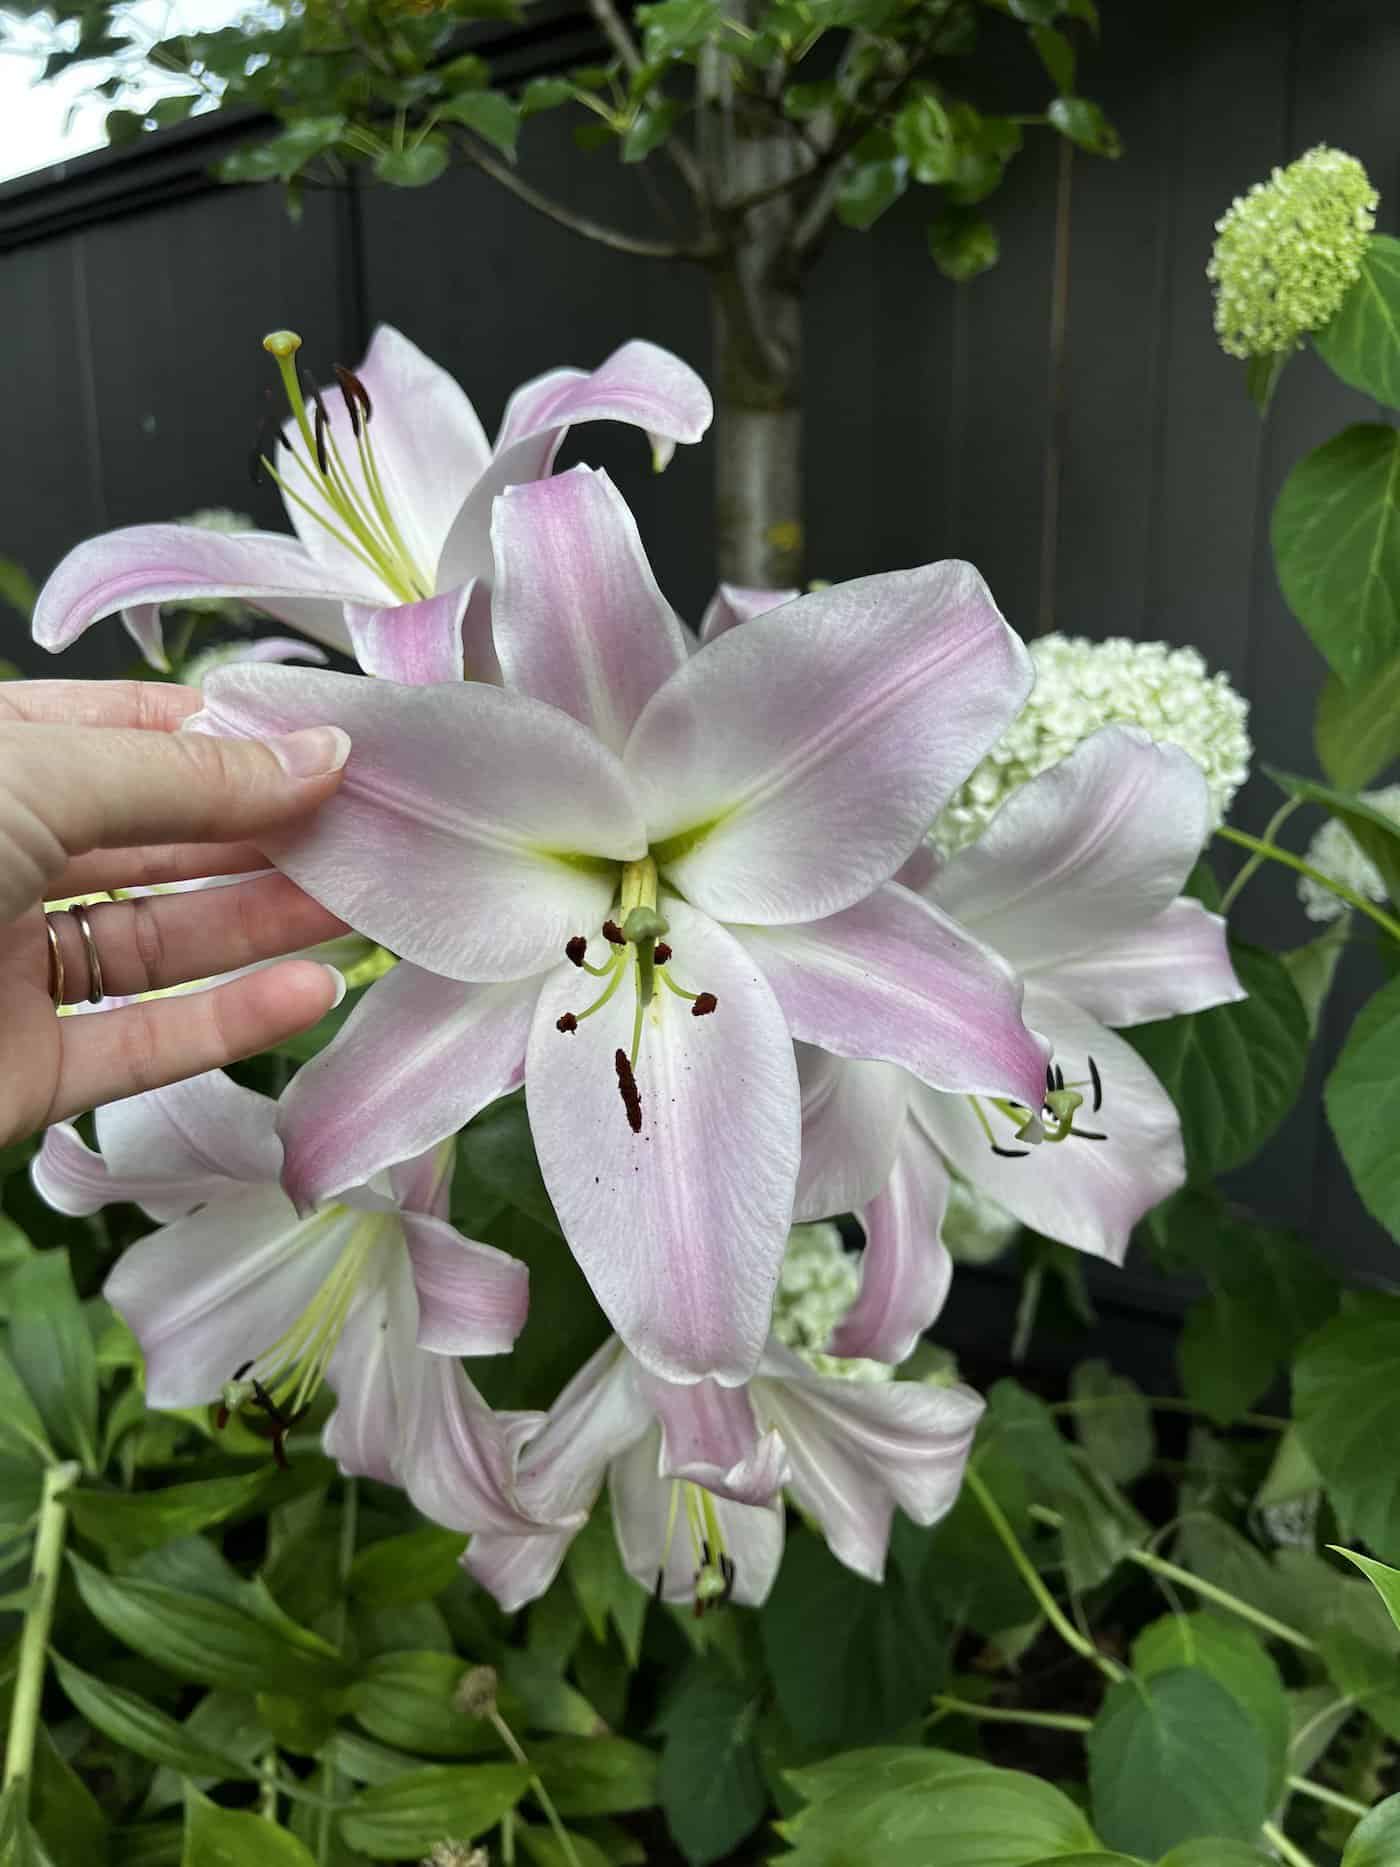 Blush lily in the garden